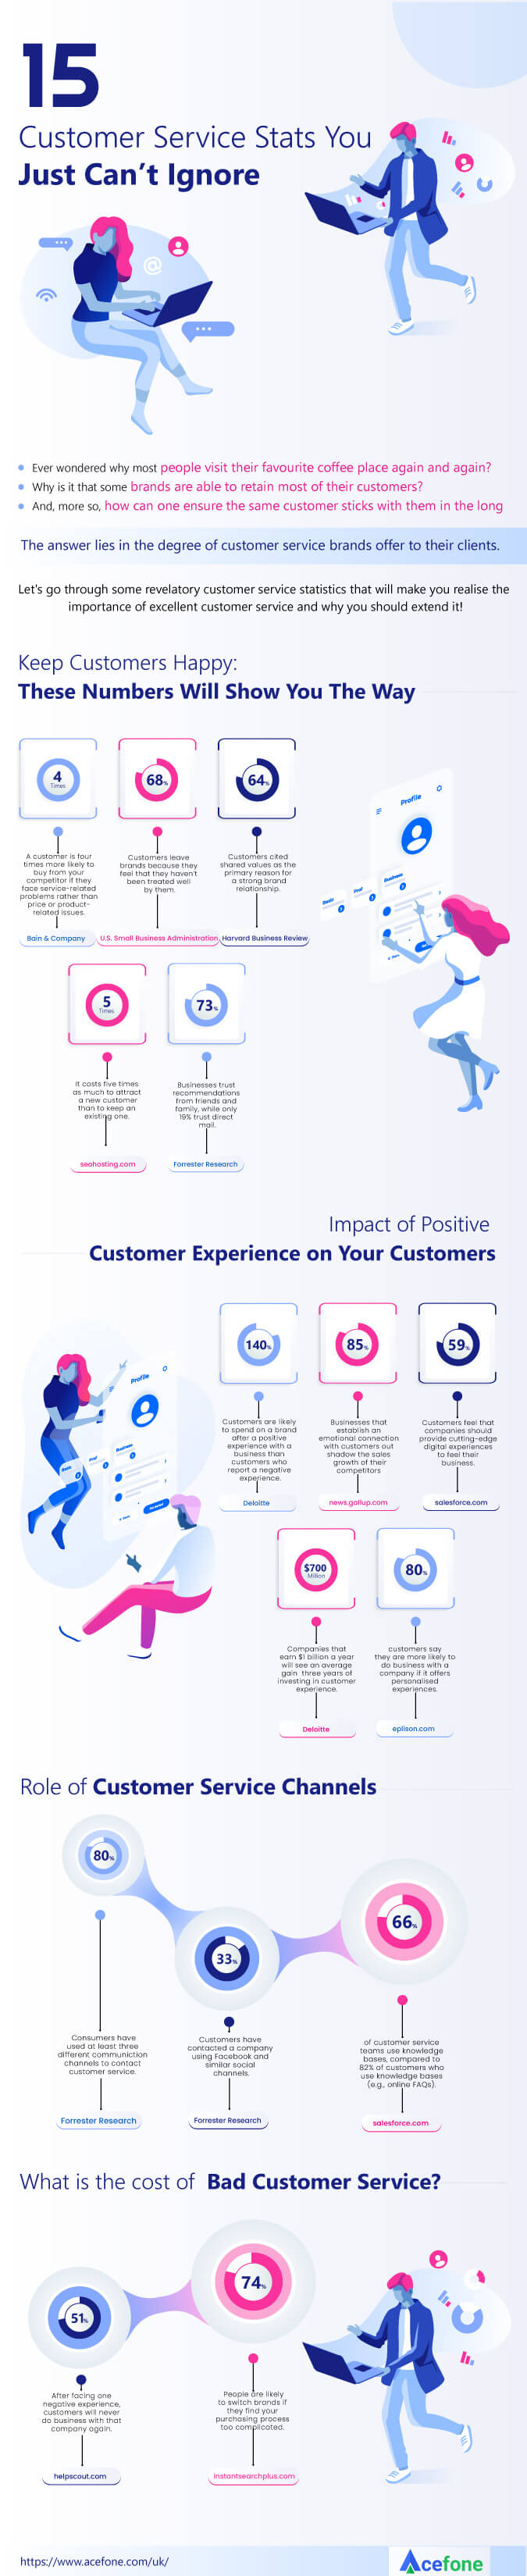 Customer Service Stats Infographic